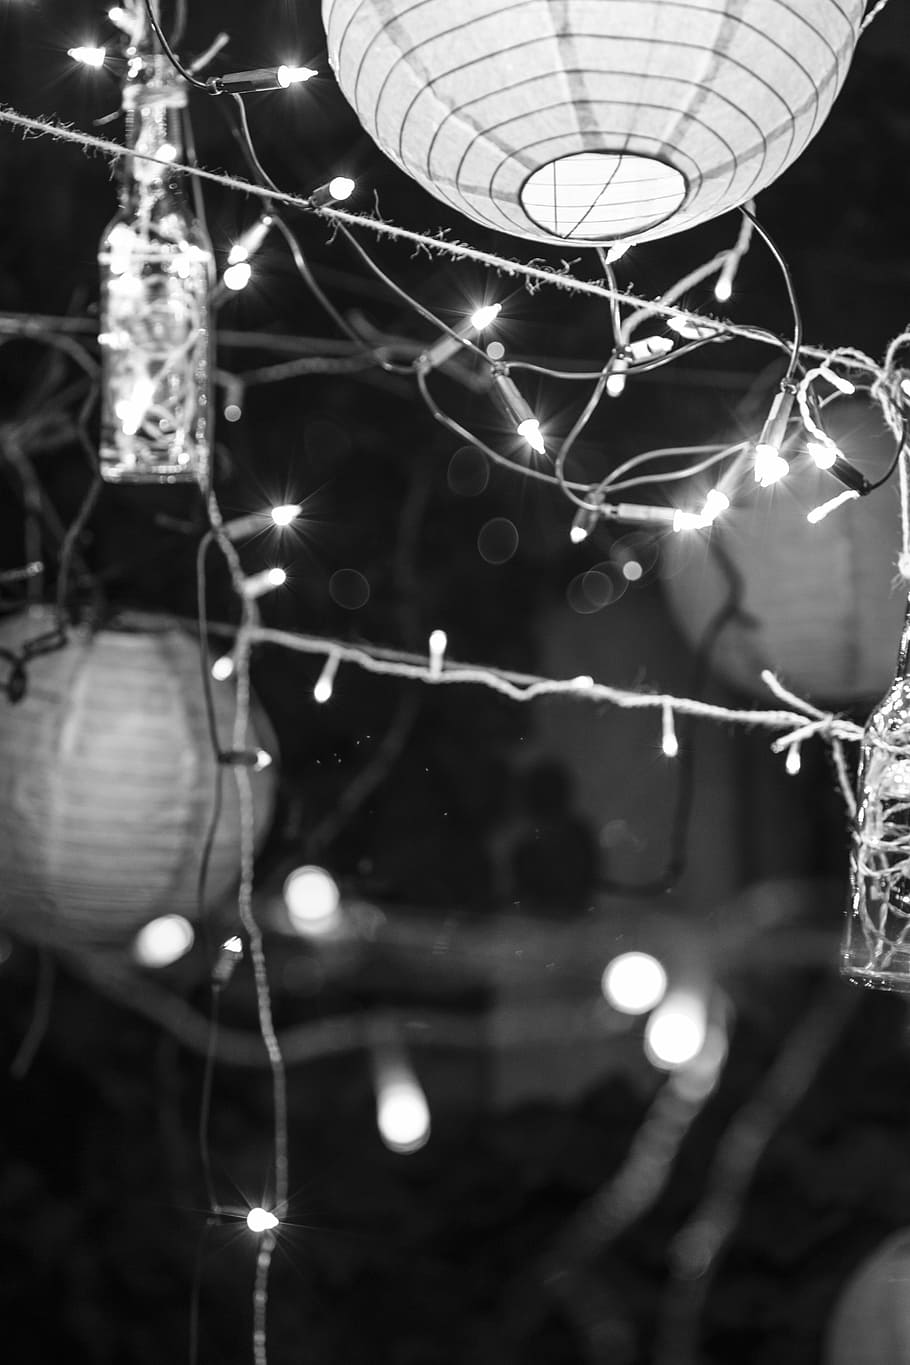 A black and white photo of some lanterns hanging from the ceiling - Christmas lights